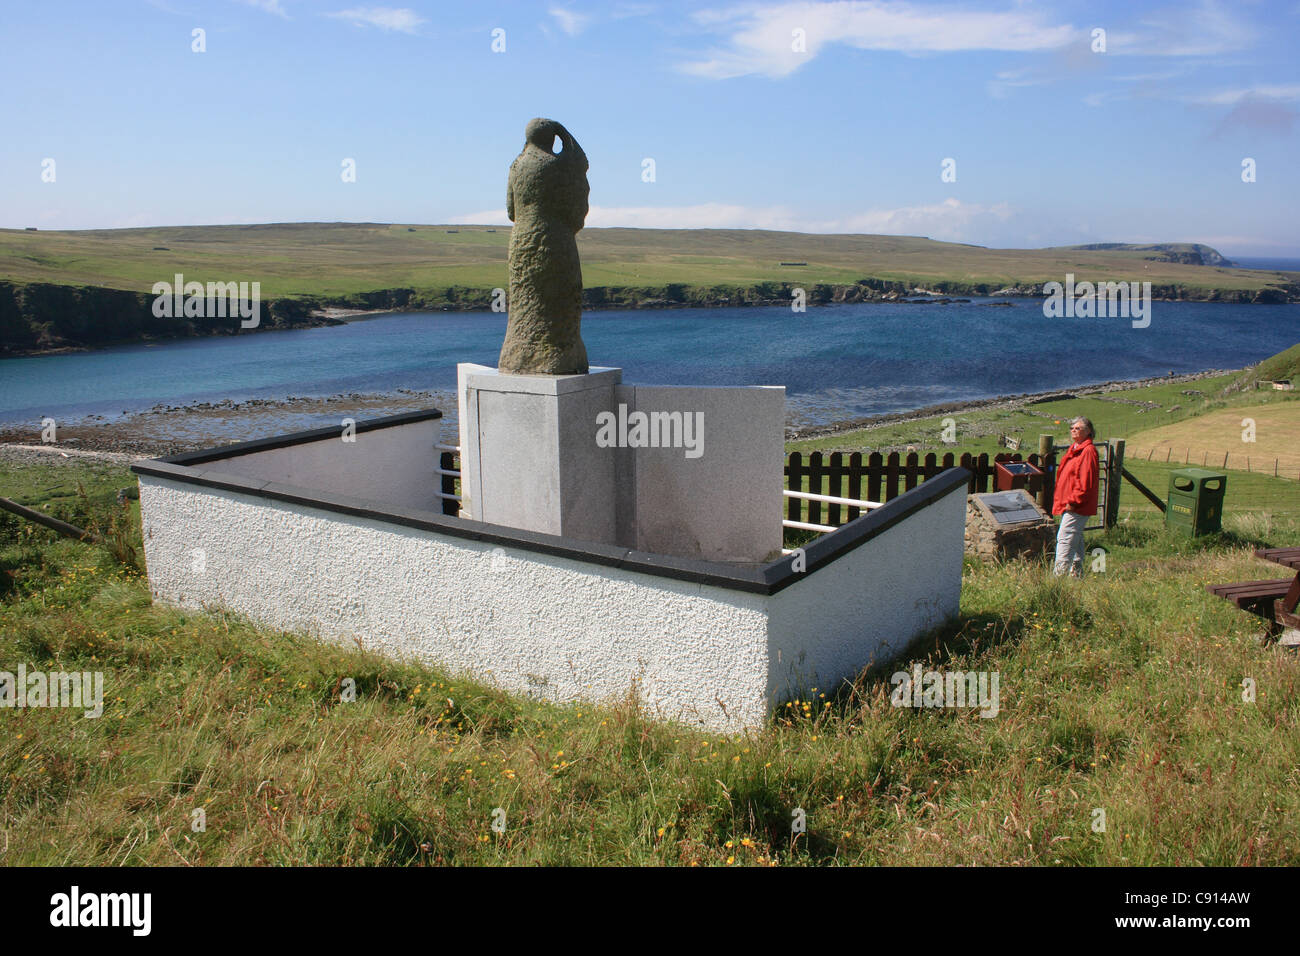 The Gloup Disaster memorial is a statue and monument on the Shetland Island of Yell. The memorial is dedicated to the 58 Stock Photo